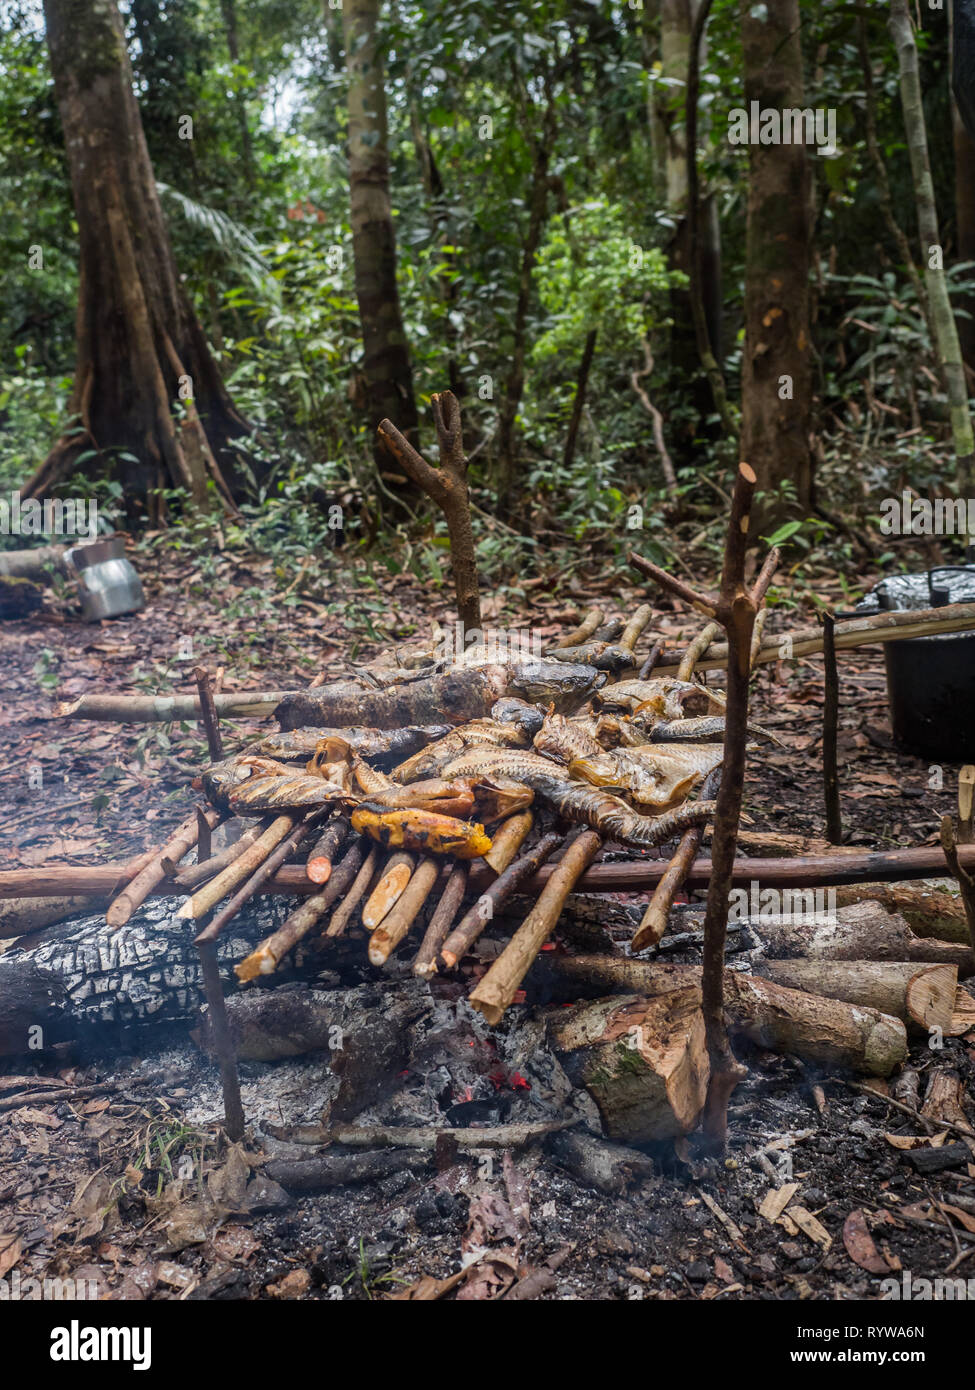 Lagoon, Brazil - March 20, 2018: Grilling fish and bananas on the fireplece on the camp in the amazons jungle Stock Photo